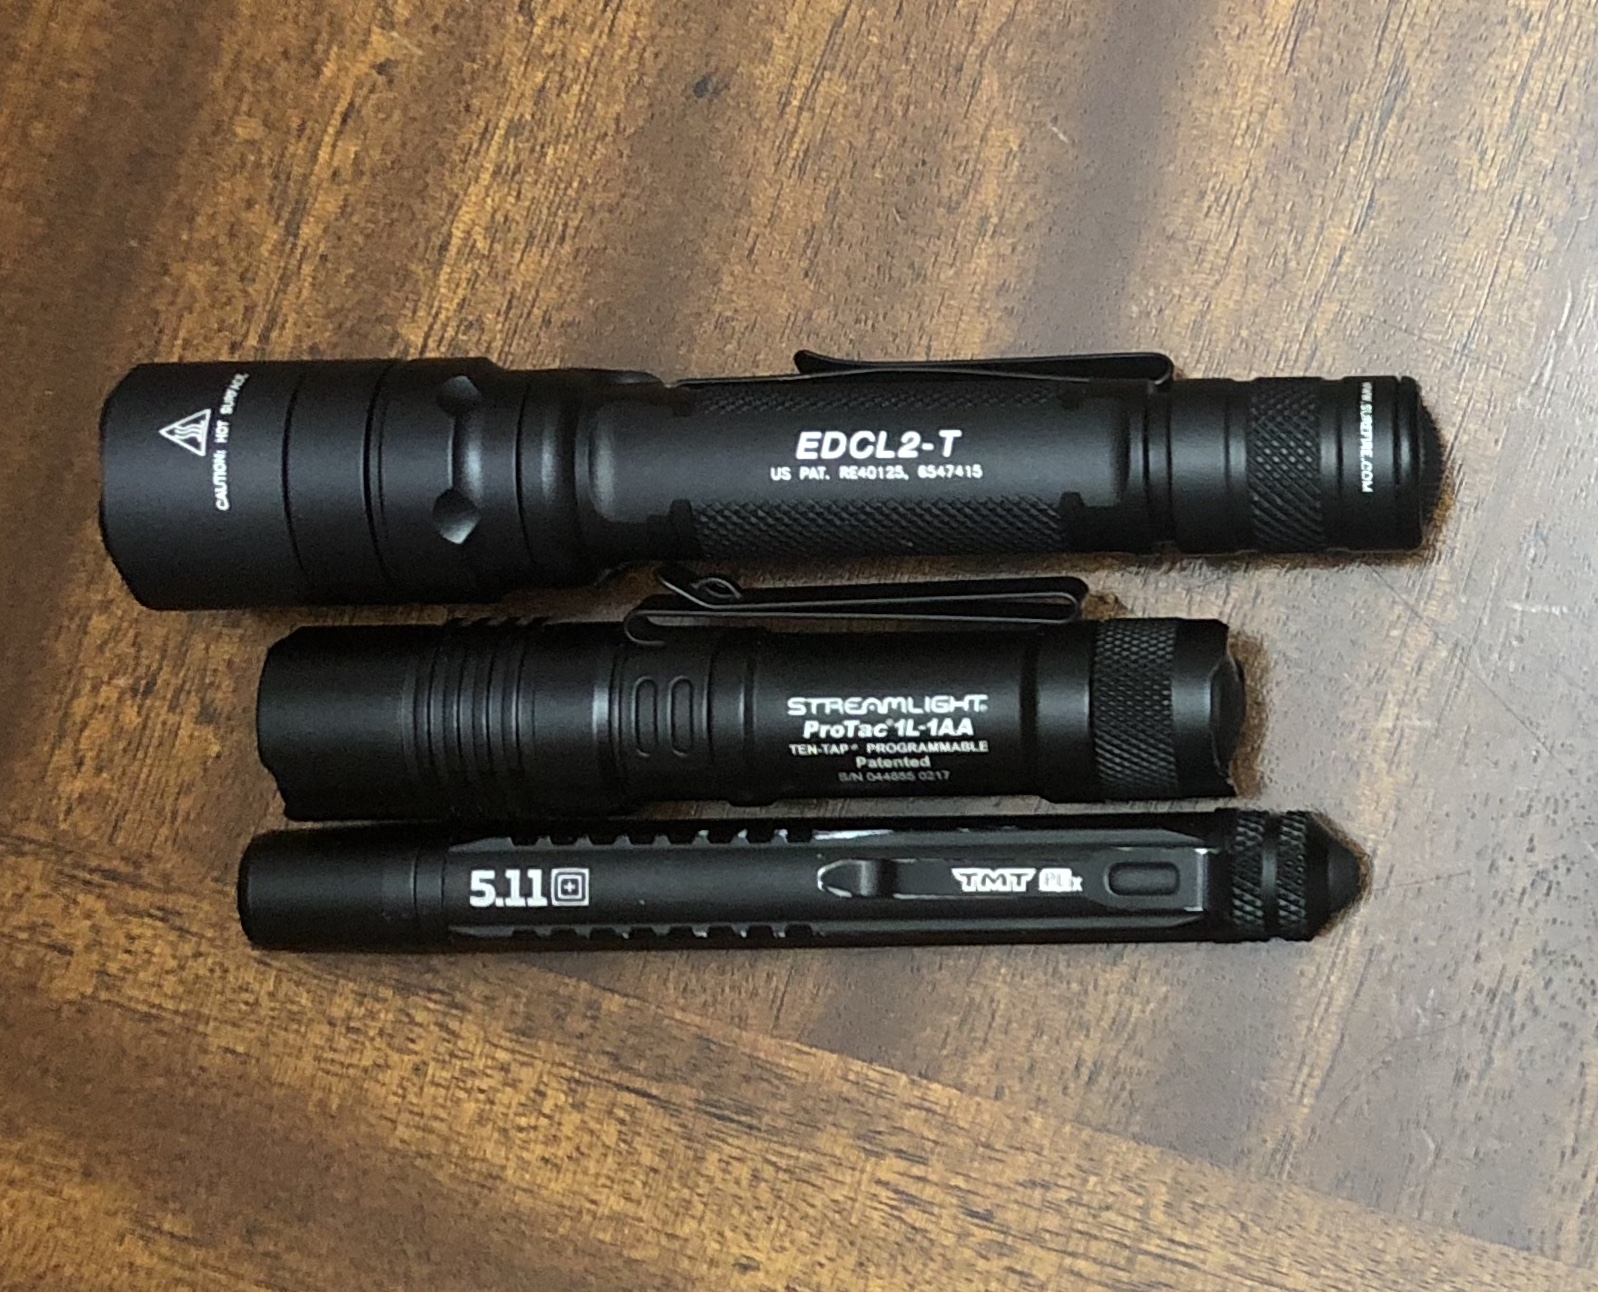 EDC Flashlights For Security and Self-Defense